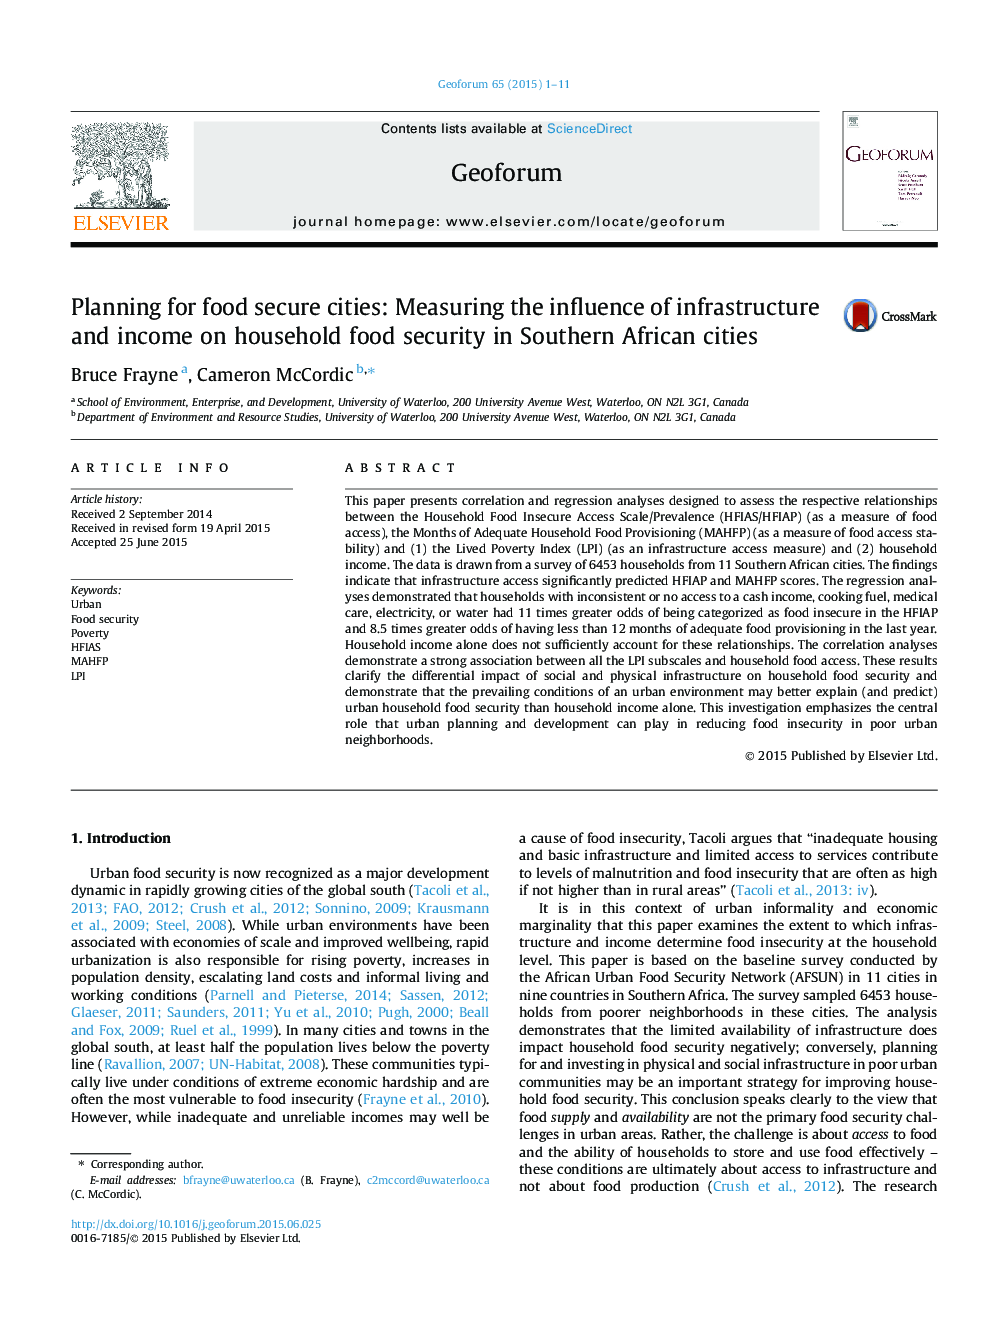 Planning for food secure cities: Measuring the influence of infrastructure and income on household food security in Southern African cities